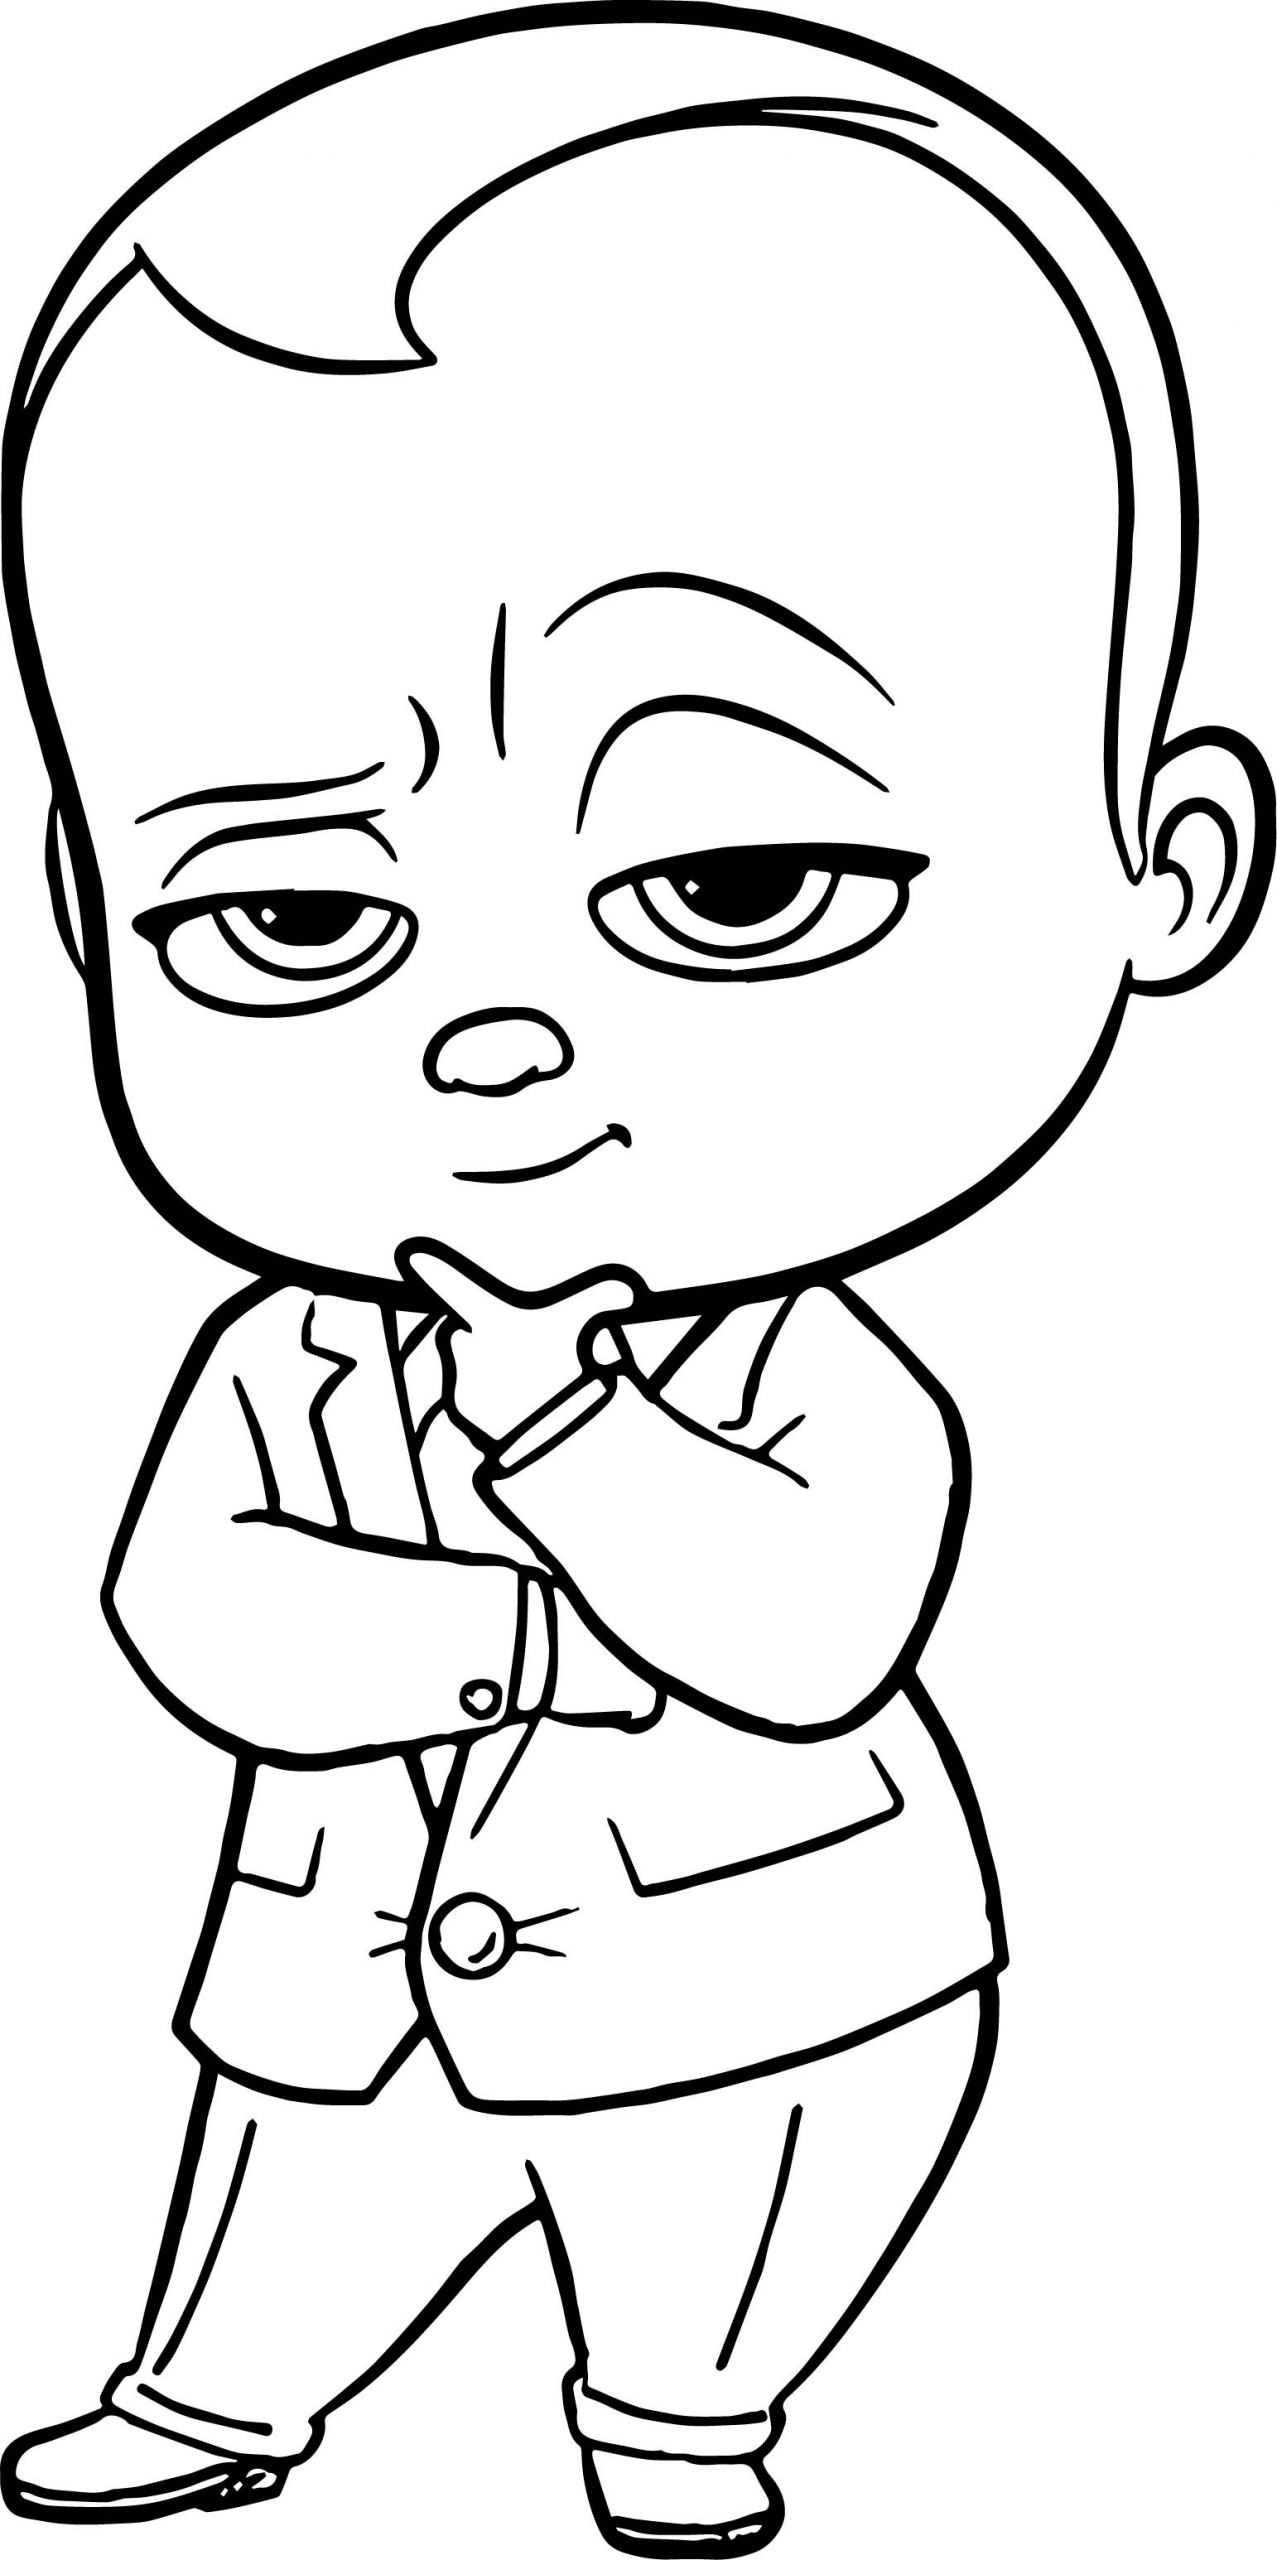 Boss Baby Coloring Pages
 Think The Boss Baby Coloring Page